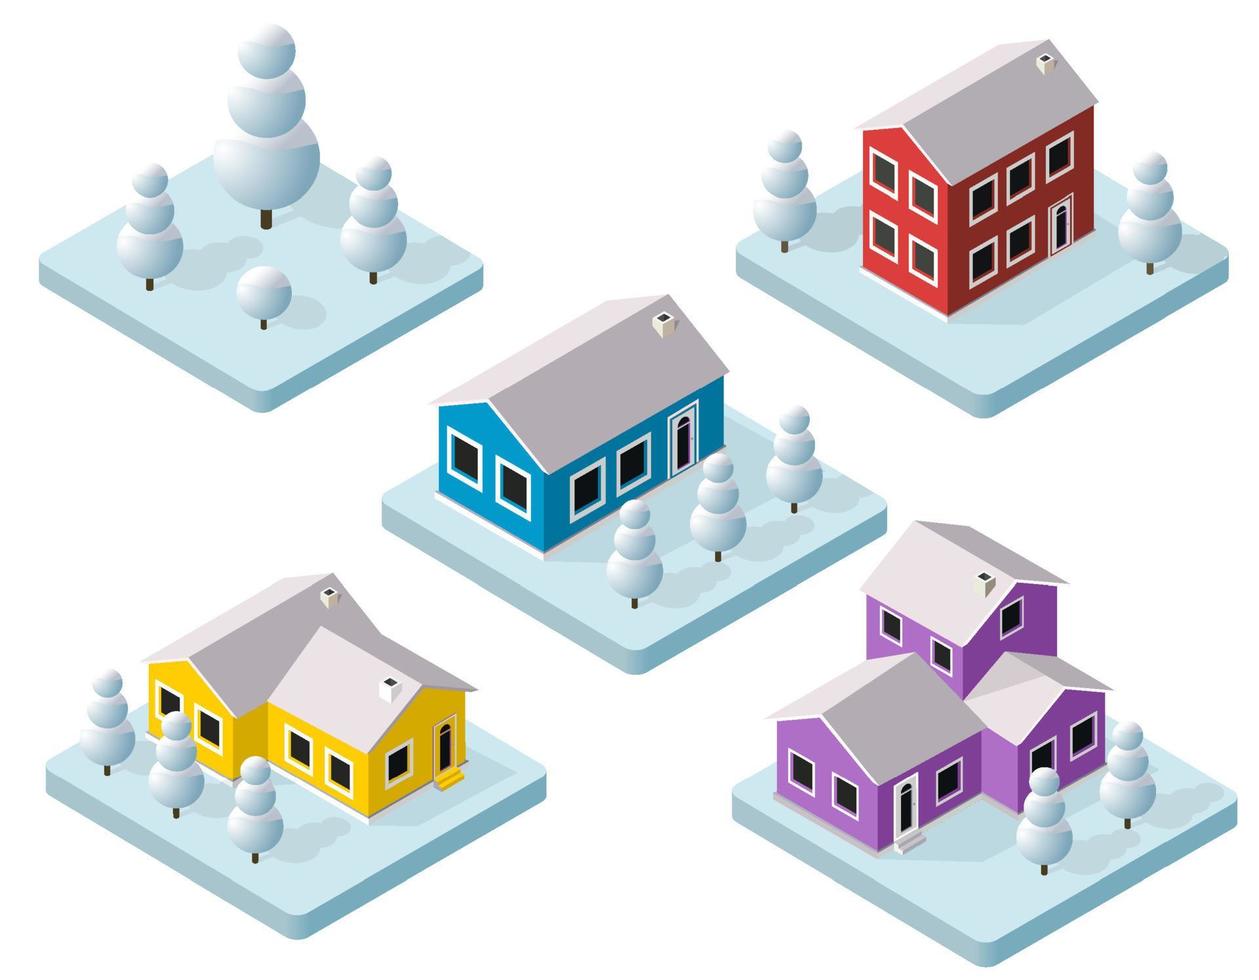 New Year Christmas 3d house in the winter forest. Isometric building in the natural landscape vector